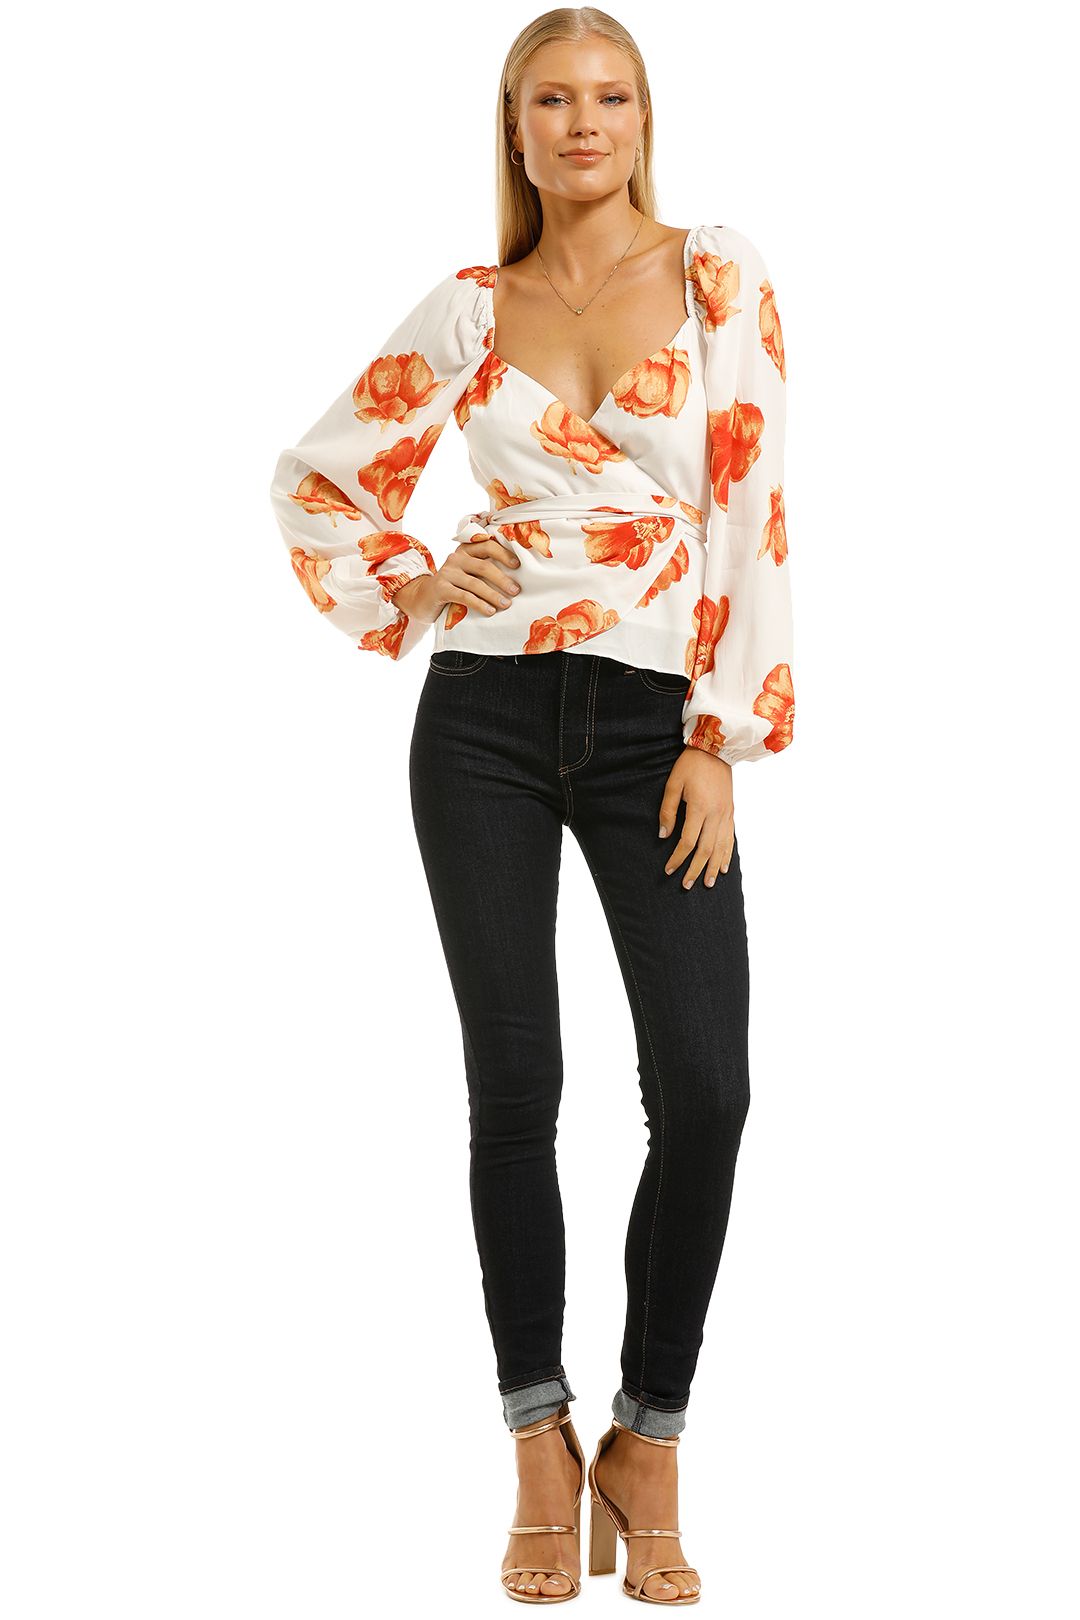 The-East-Order-Frenchie-Top-Fallen-Flowers-Front